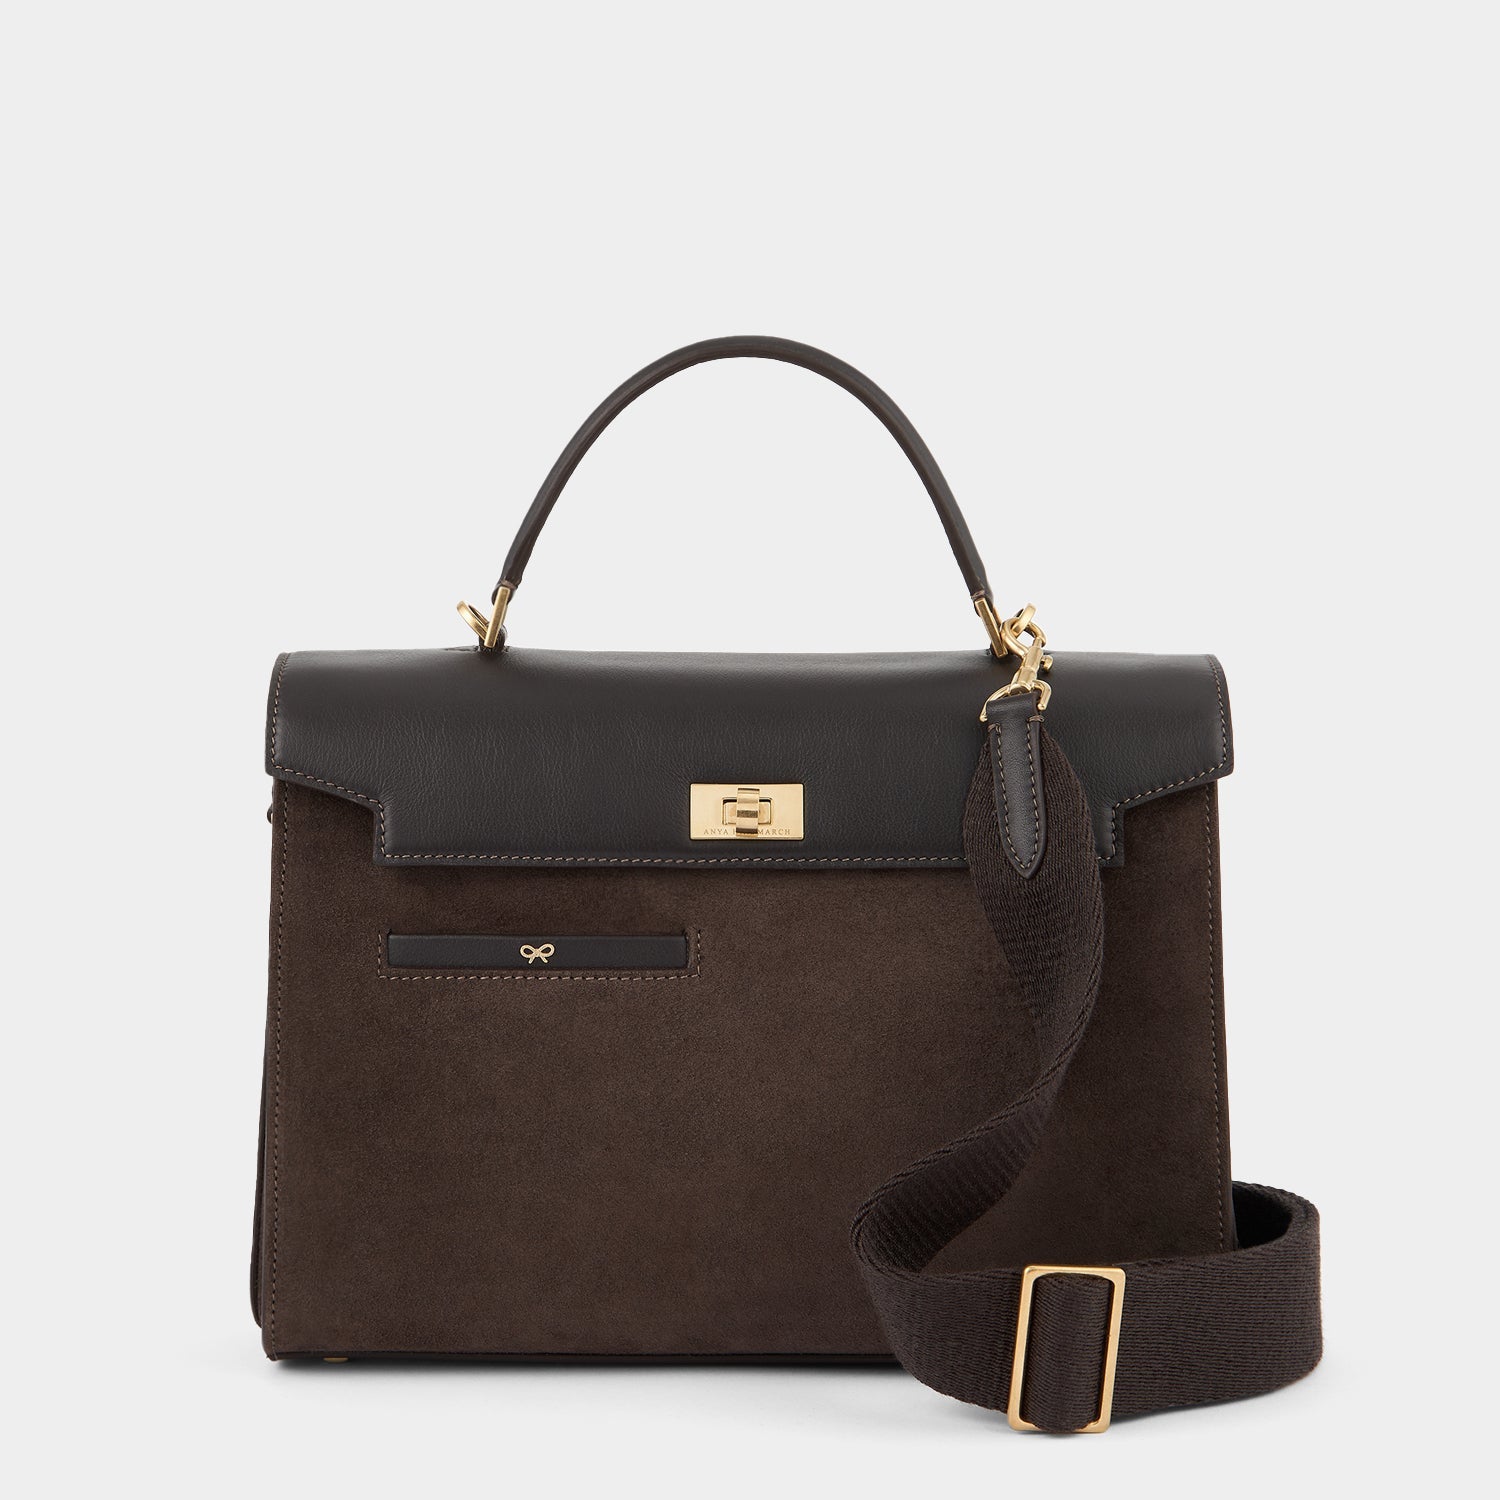 Mortimer Top Handle -

                  
                    Leather in Espresso -
                  

                  Anya Hindmarch EU
